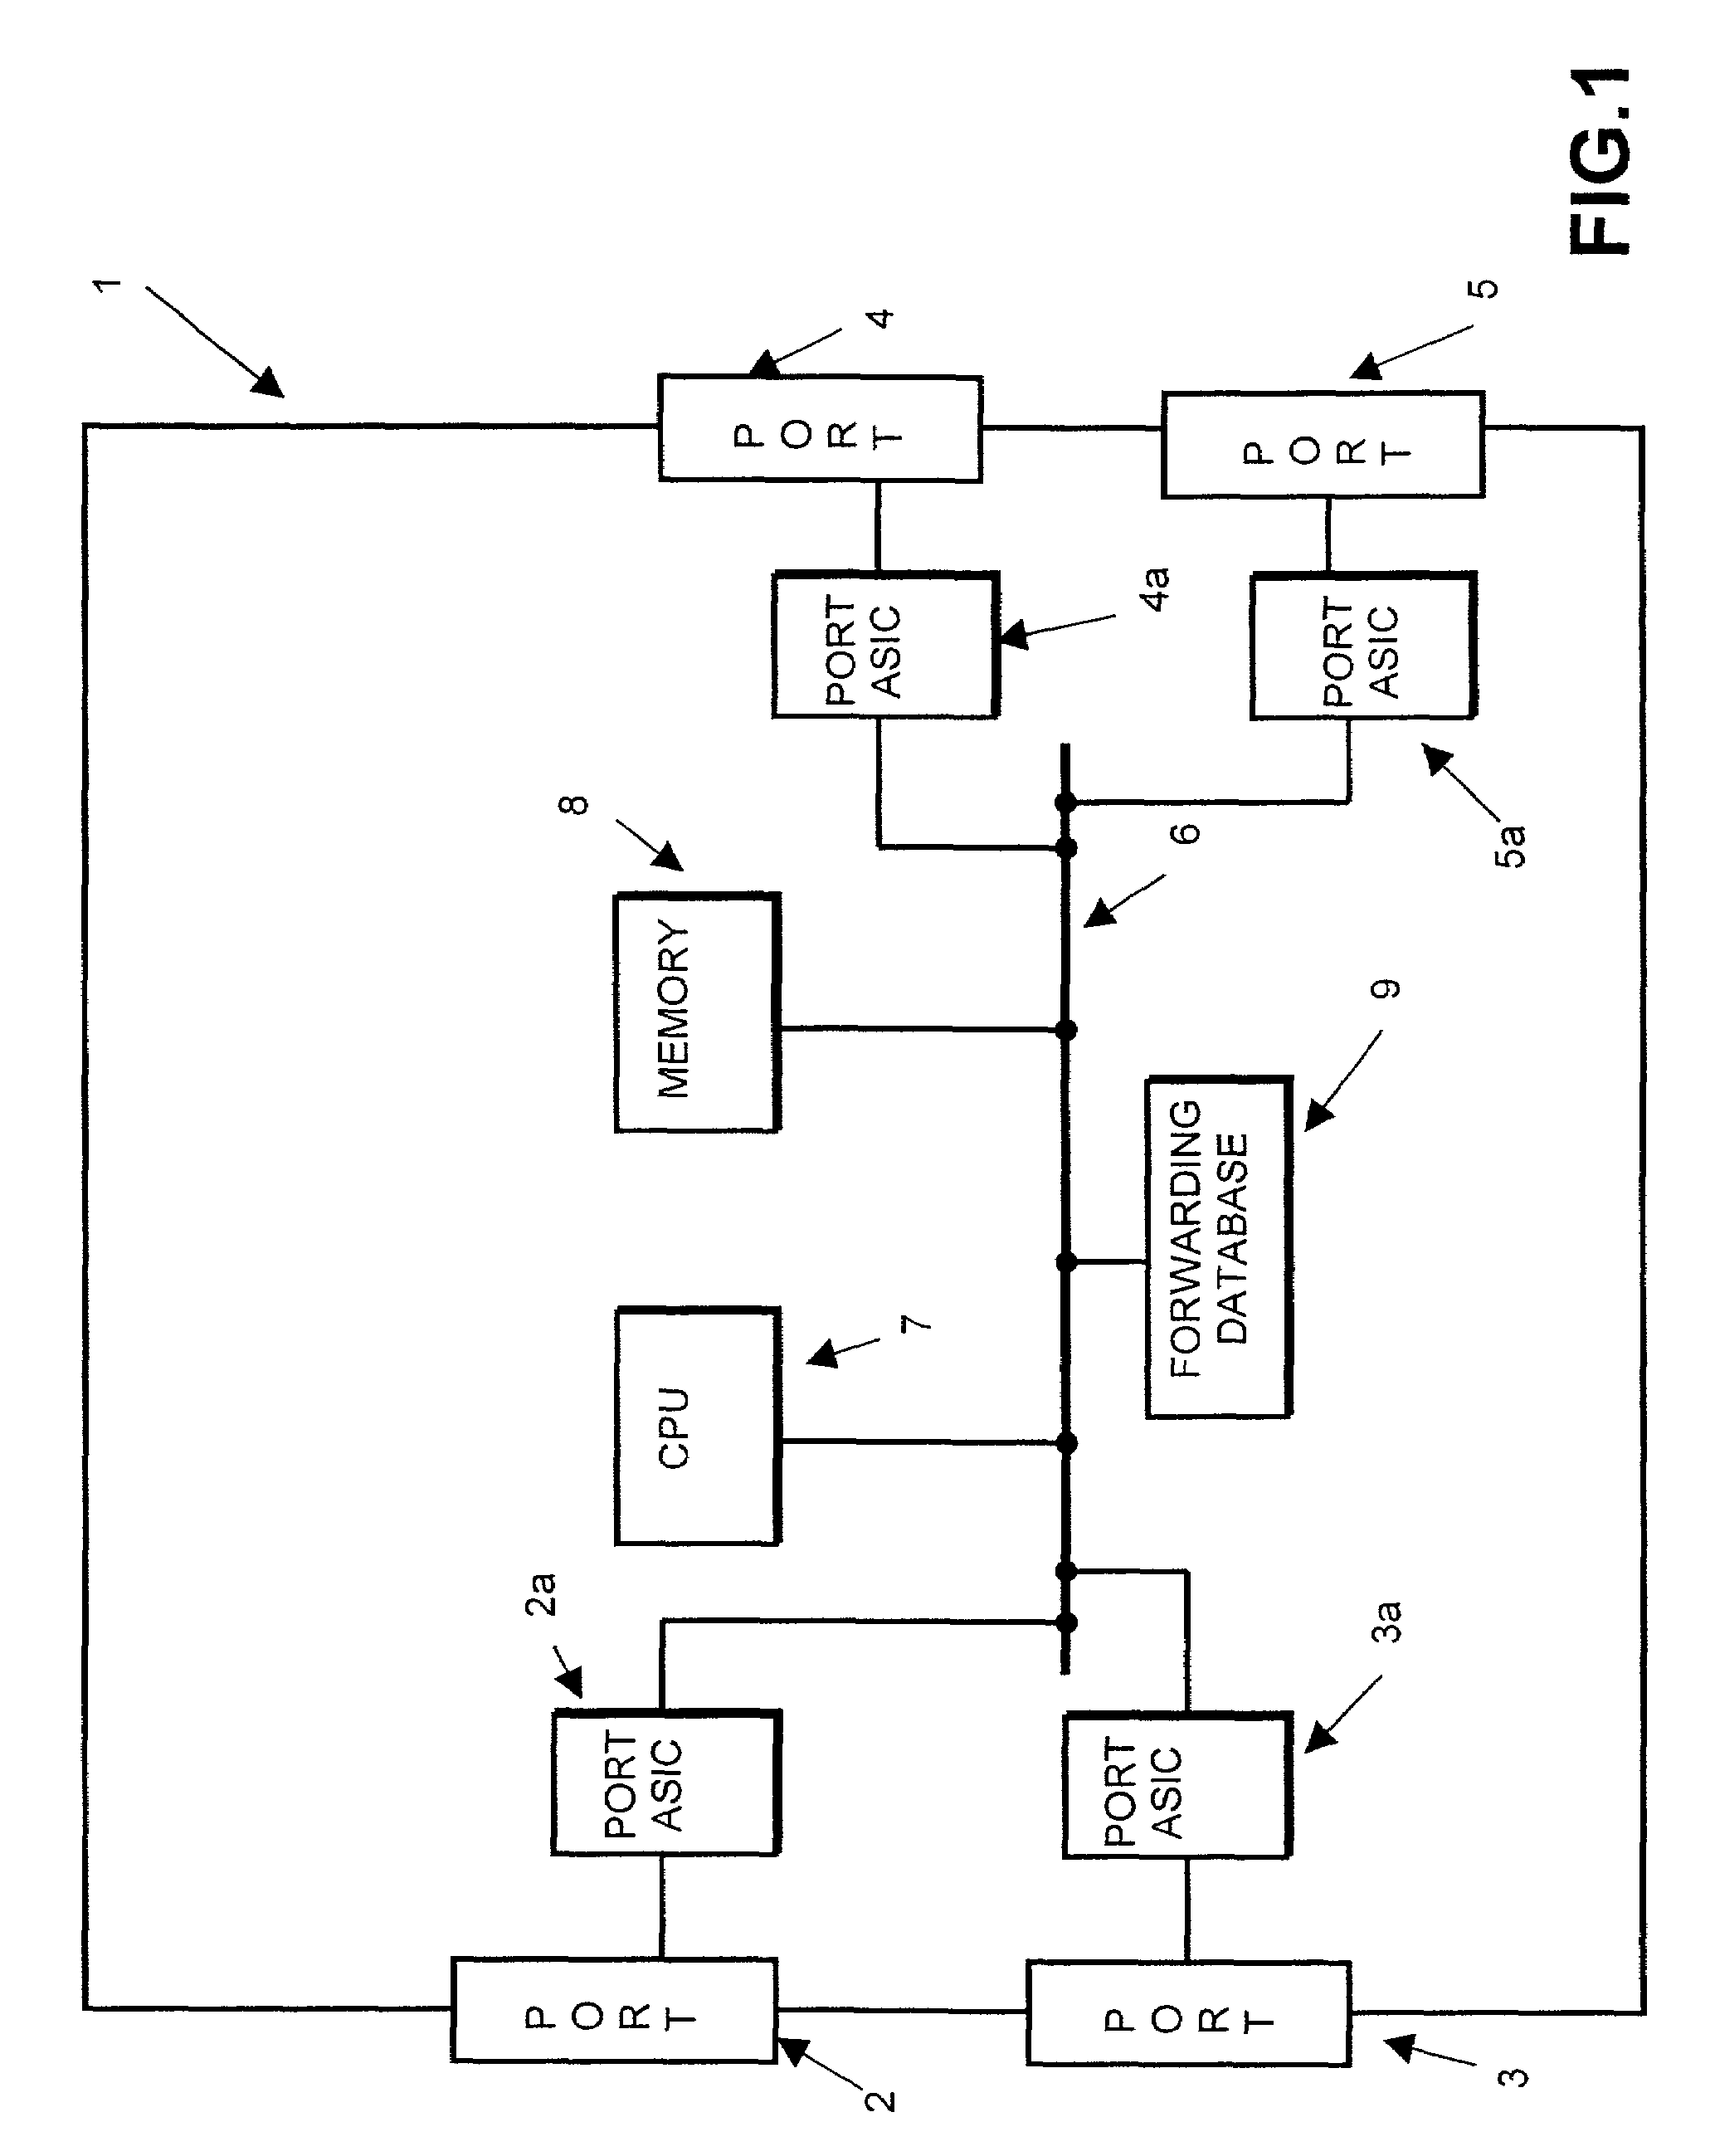 Ethernet units adapted for loop configuration and method of operating same